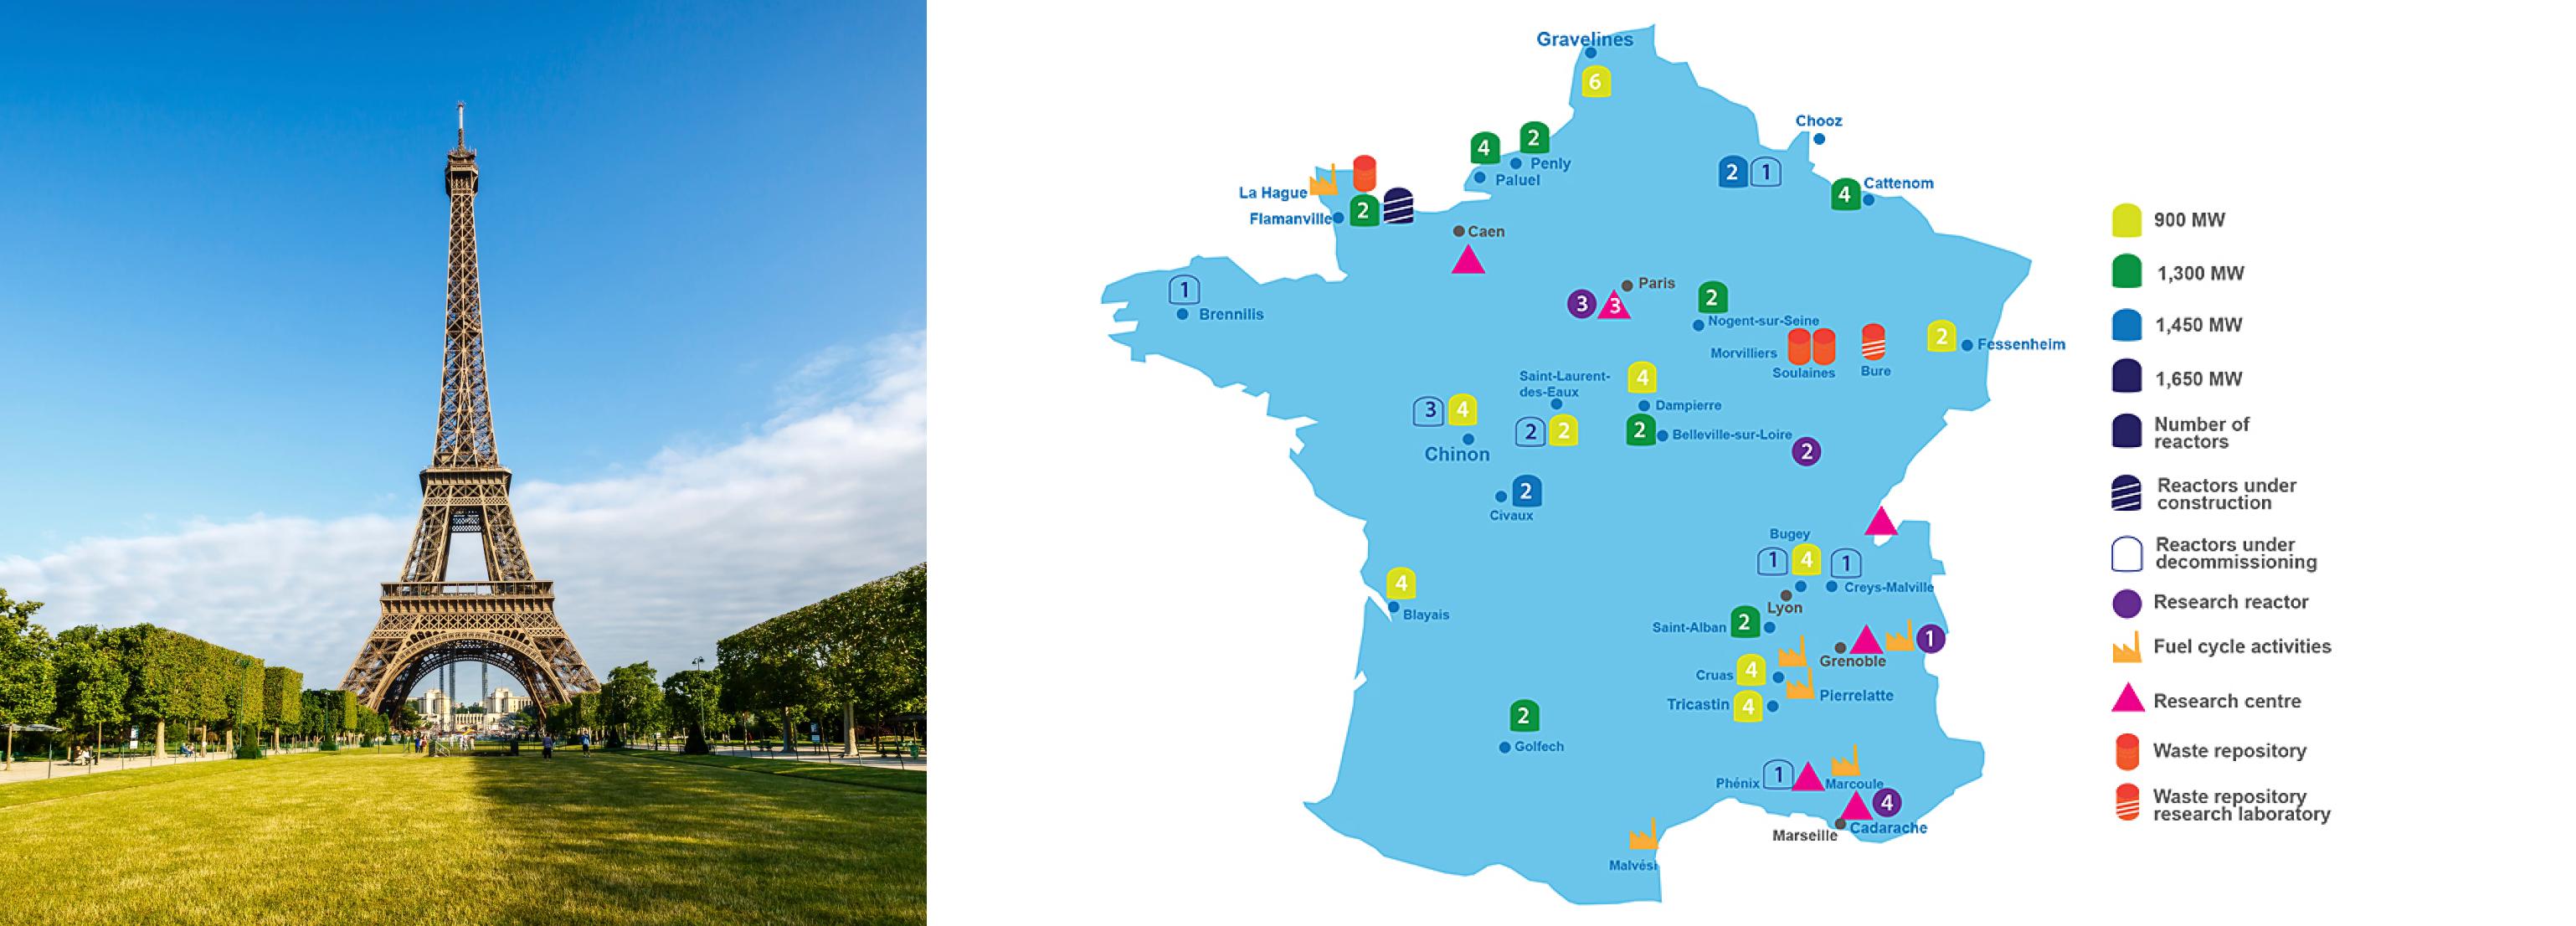 Eiffel tower and nuclear power plant location map in France